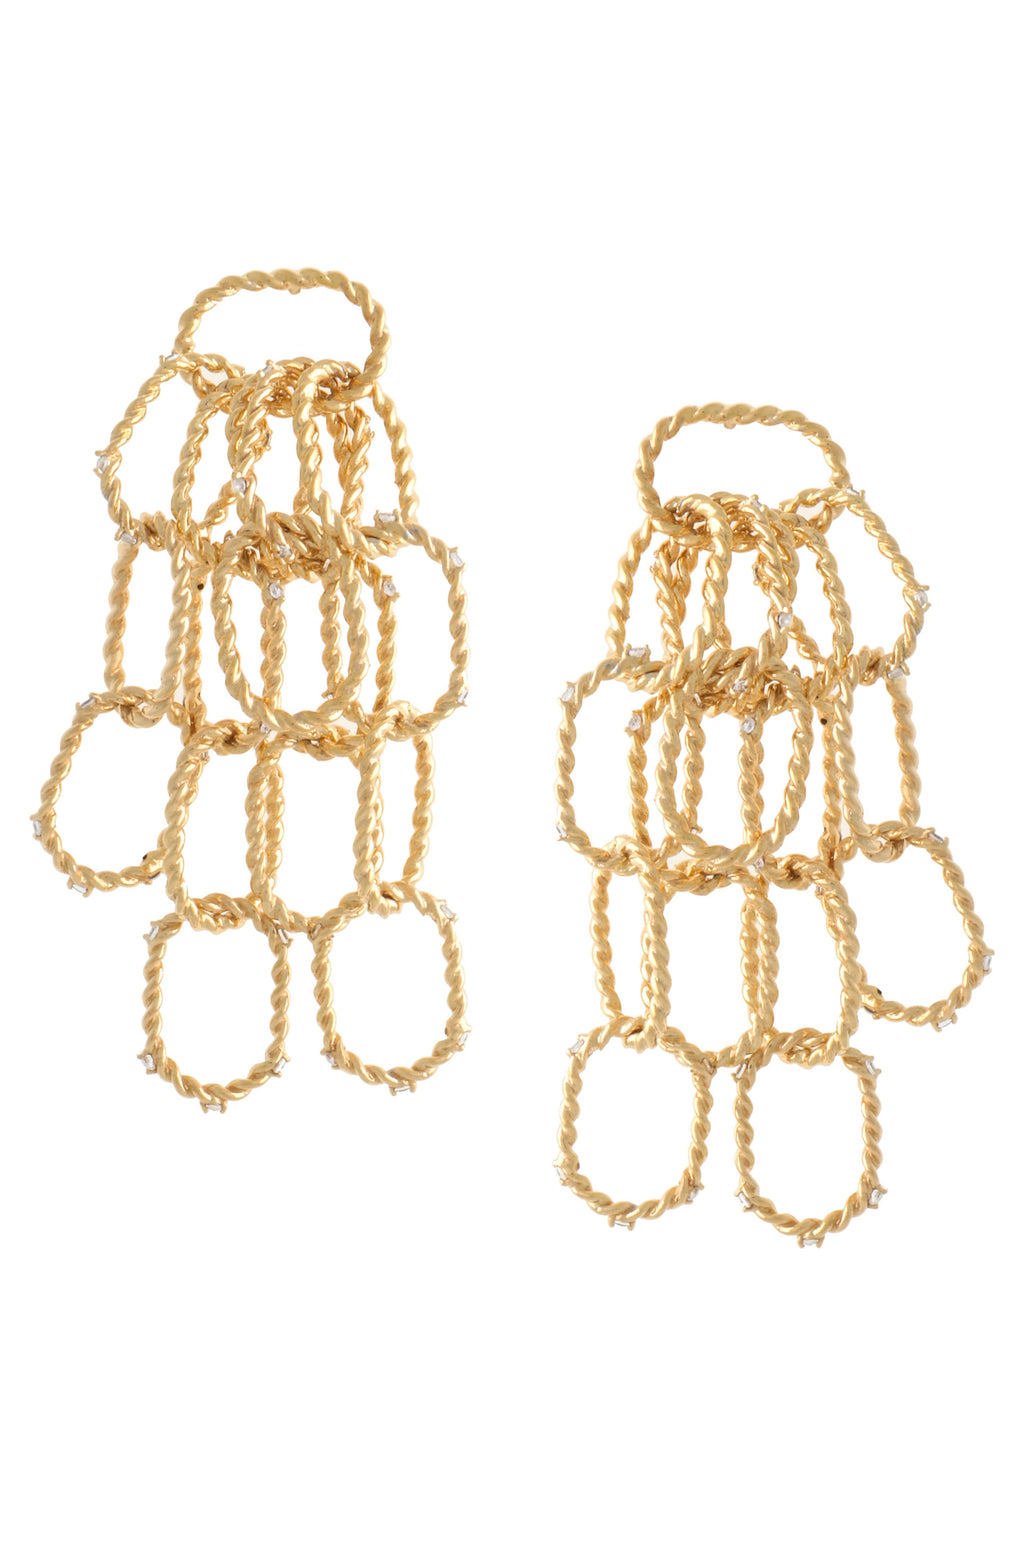 DANGLING STATEMENT WIRE EARRINGS WITH CLEAR STONES